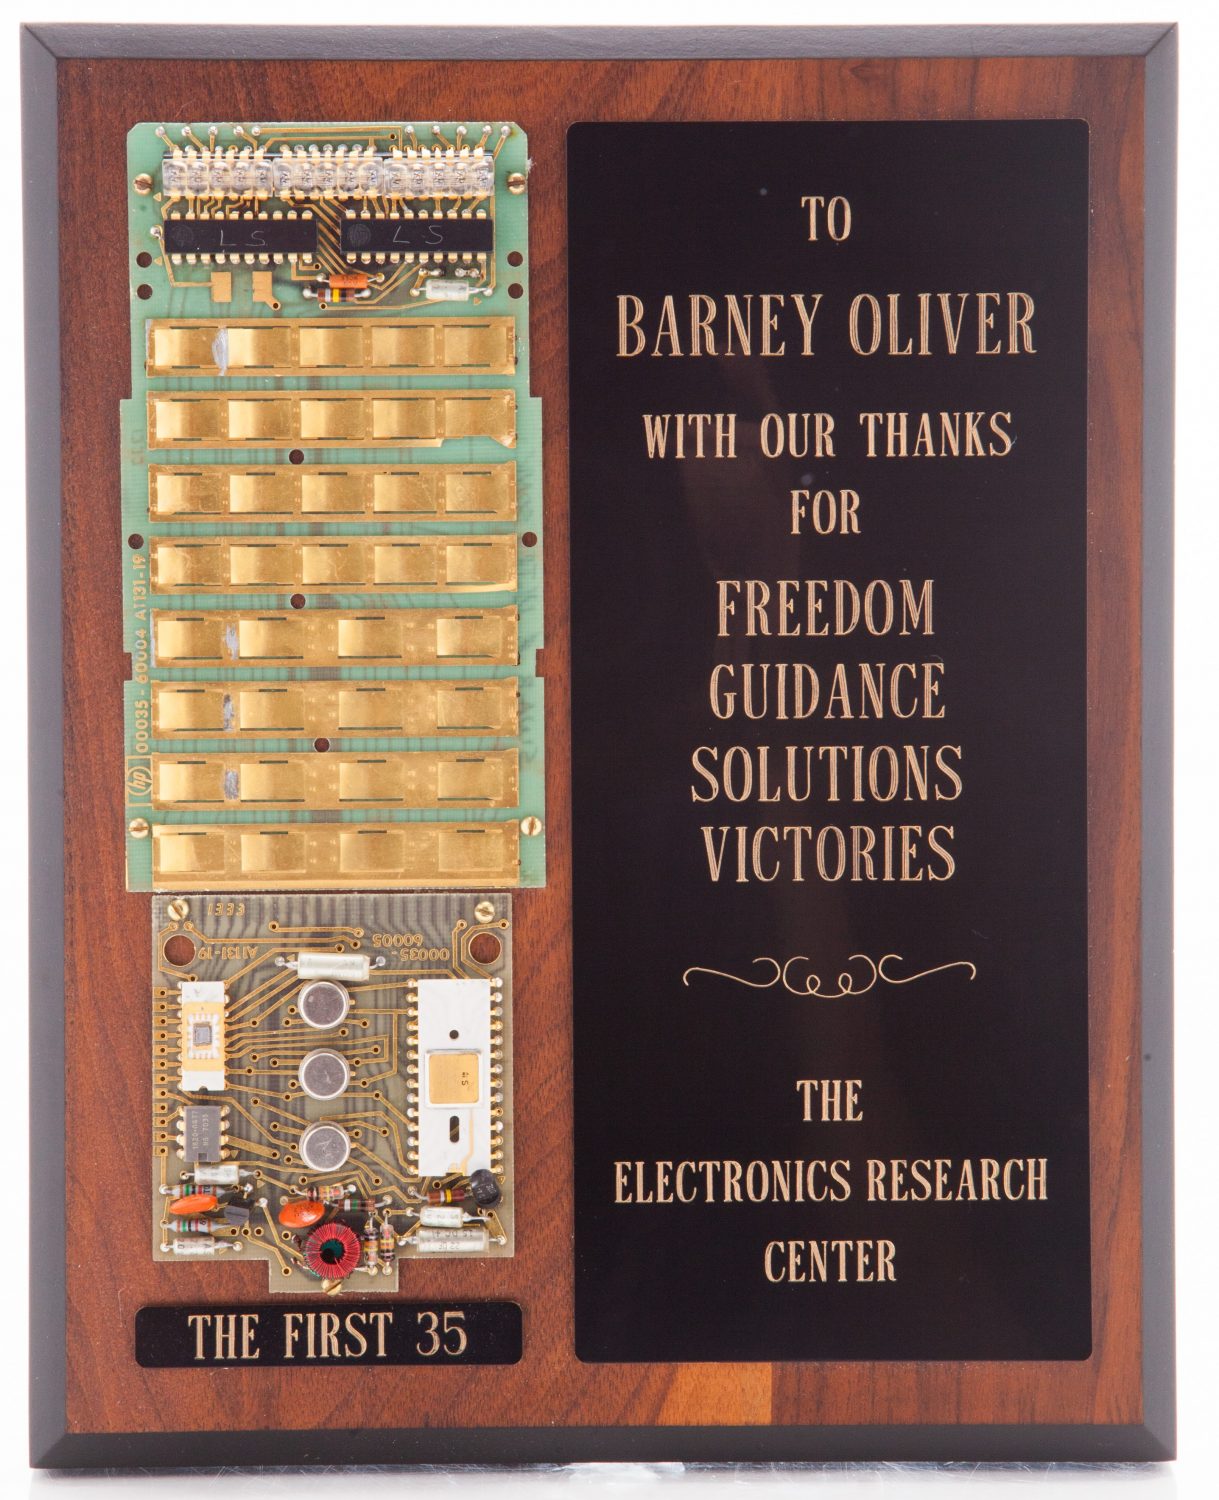 Plaque given to Barney Oliver with mounted components of the first HP 35 logic chip and keyboard infrastructure.